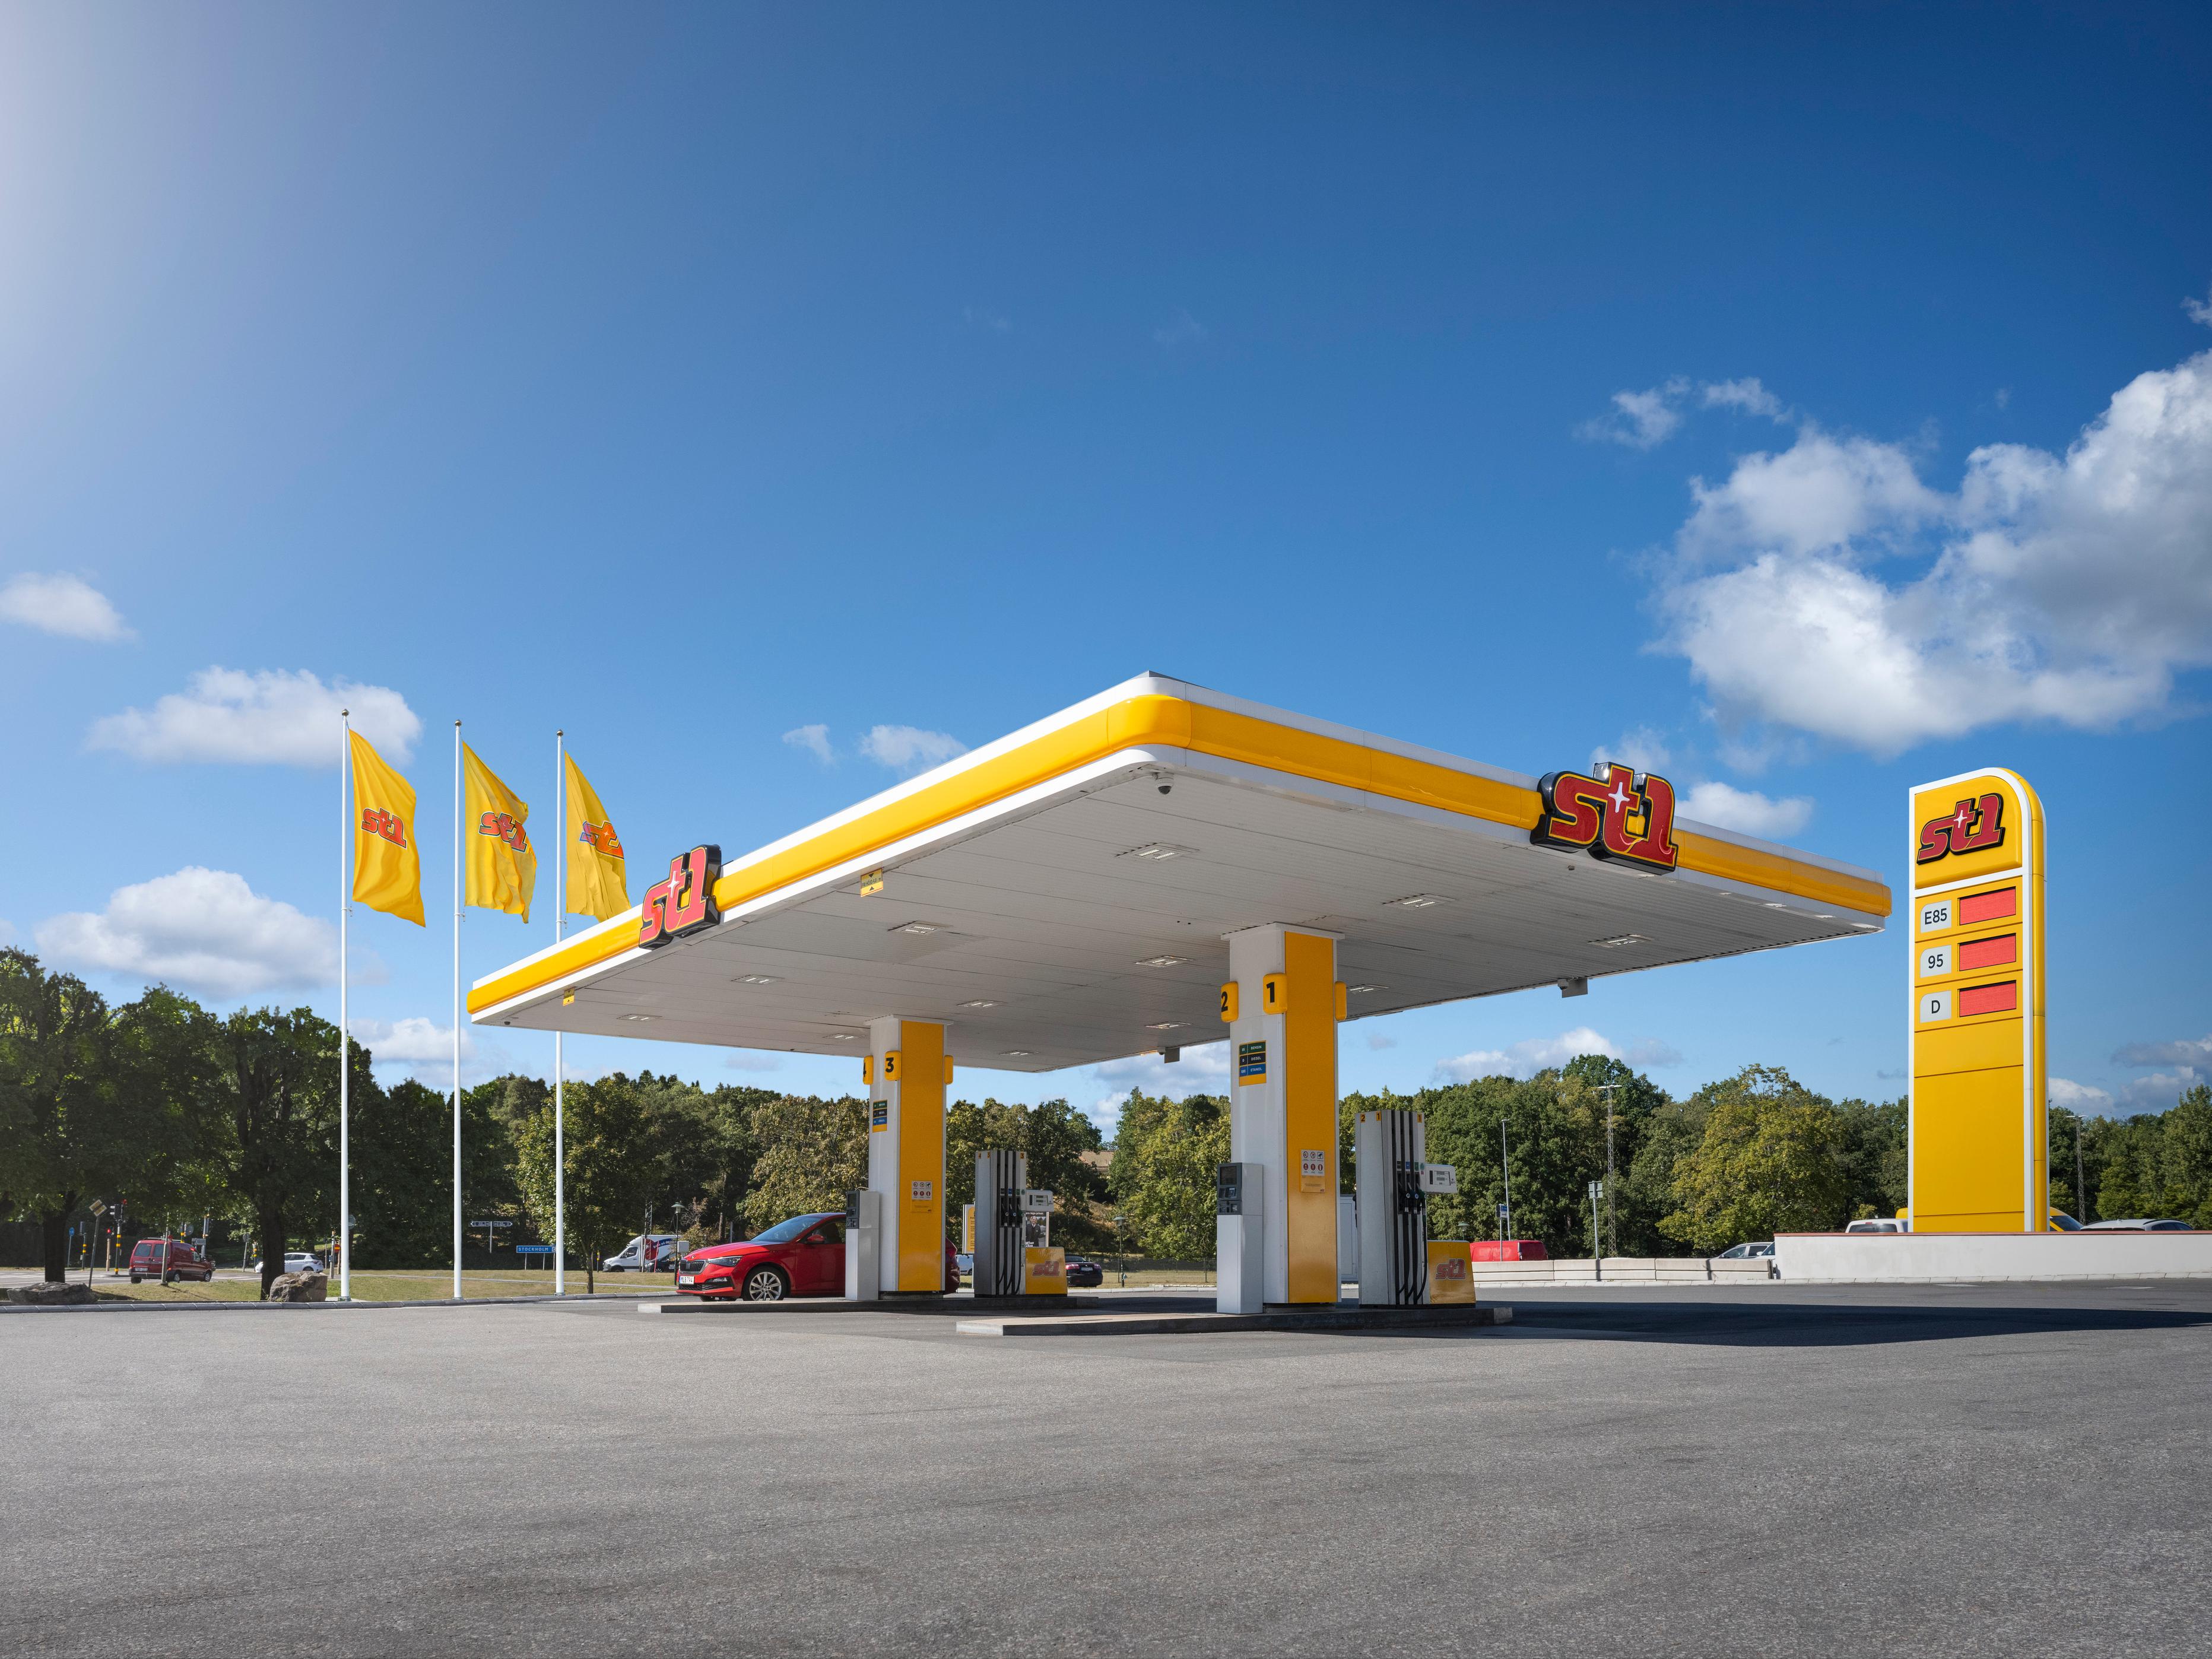 Image of gas station